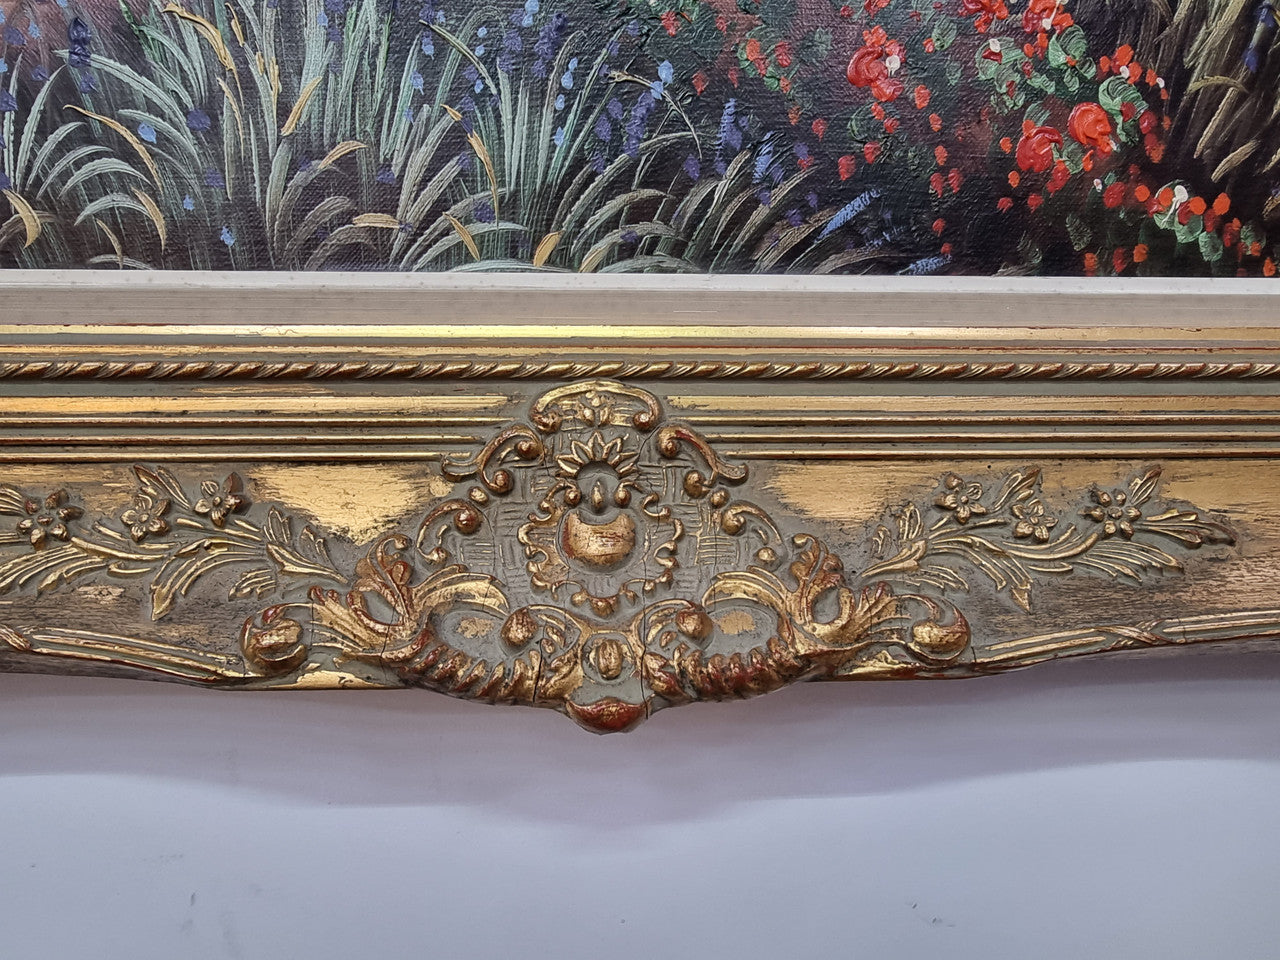 Sourced in France a colorful signed oil on canvas " Mediterranean coastal scene" in a decorative gilt frame. It is in good original detailed condition.